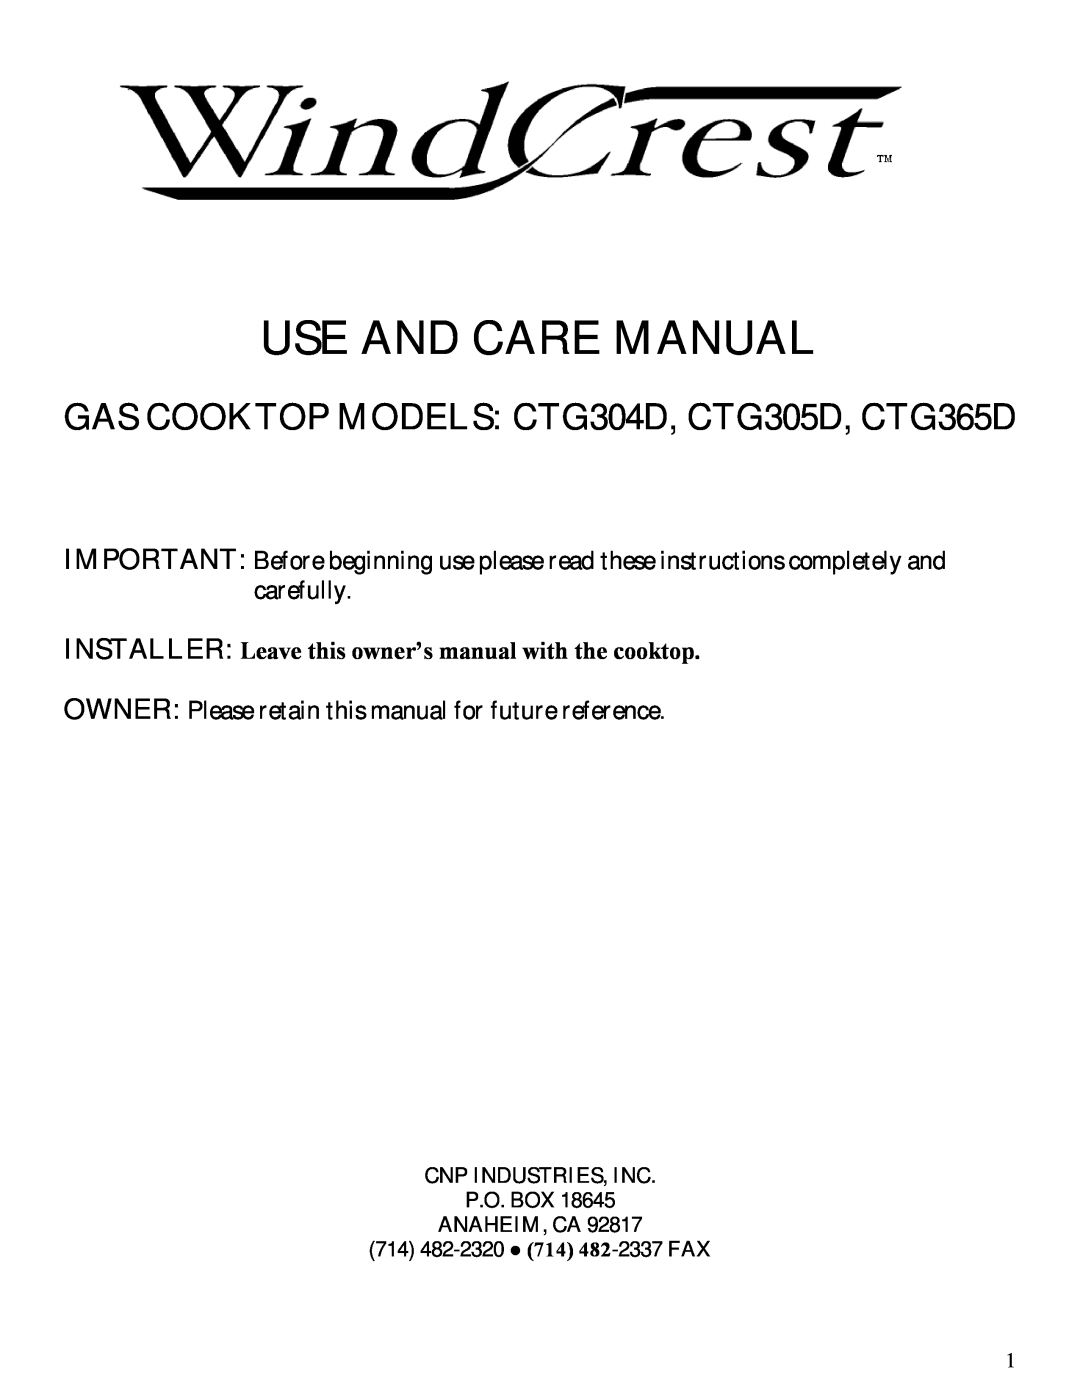 Wind Crest owner manual GAS COOKTOP MODELS CTG304D, CTG305D, CTG365D, Use And Care Manual 